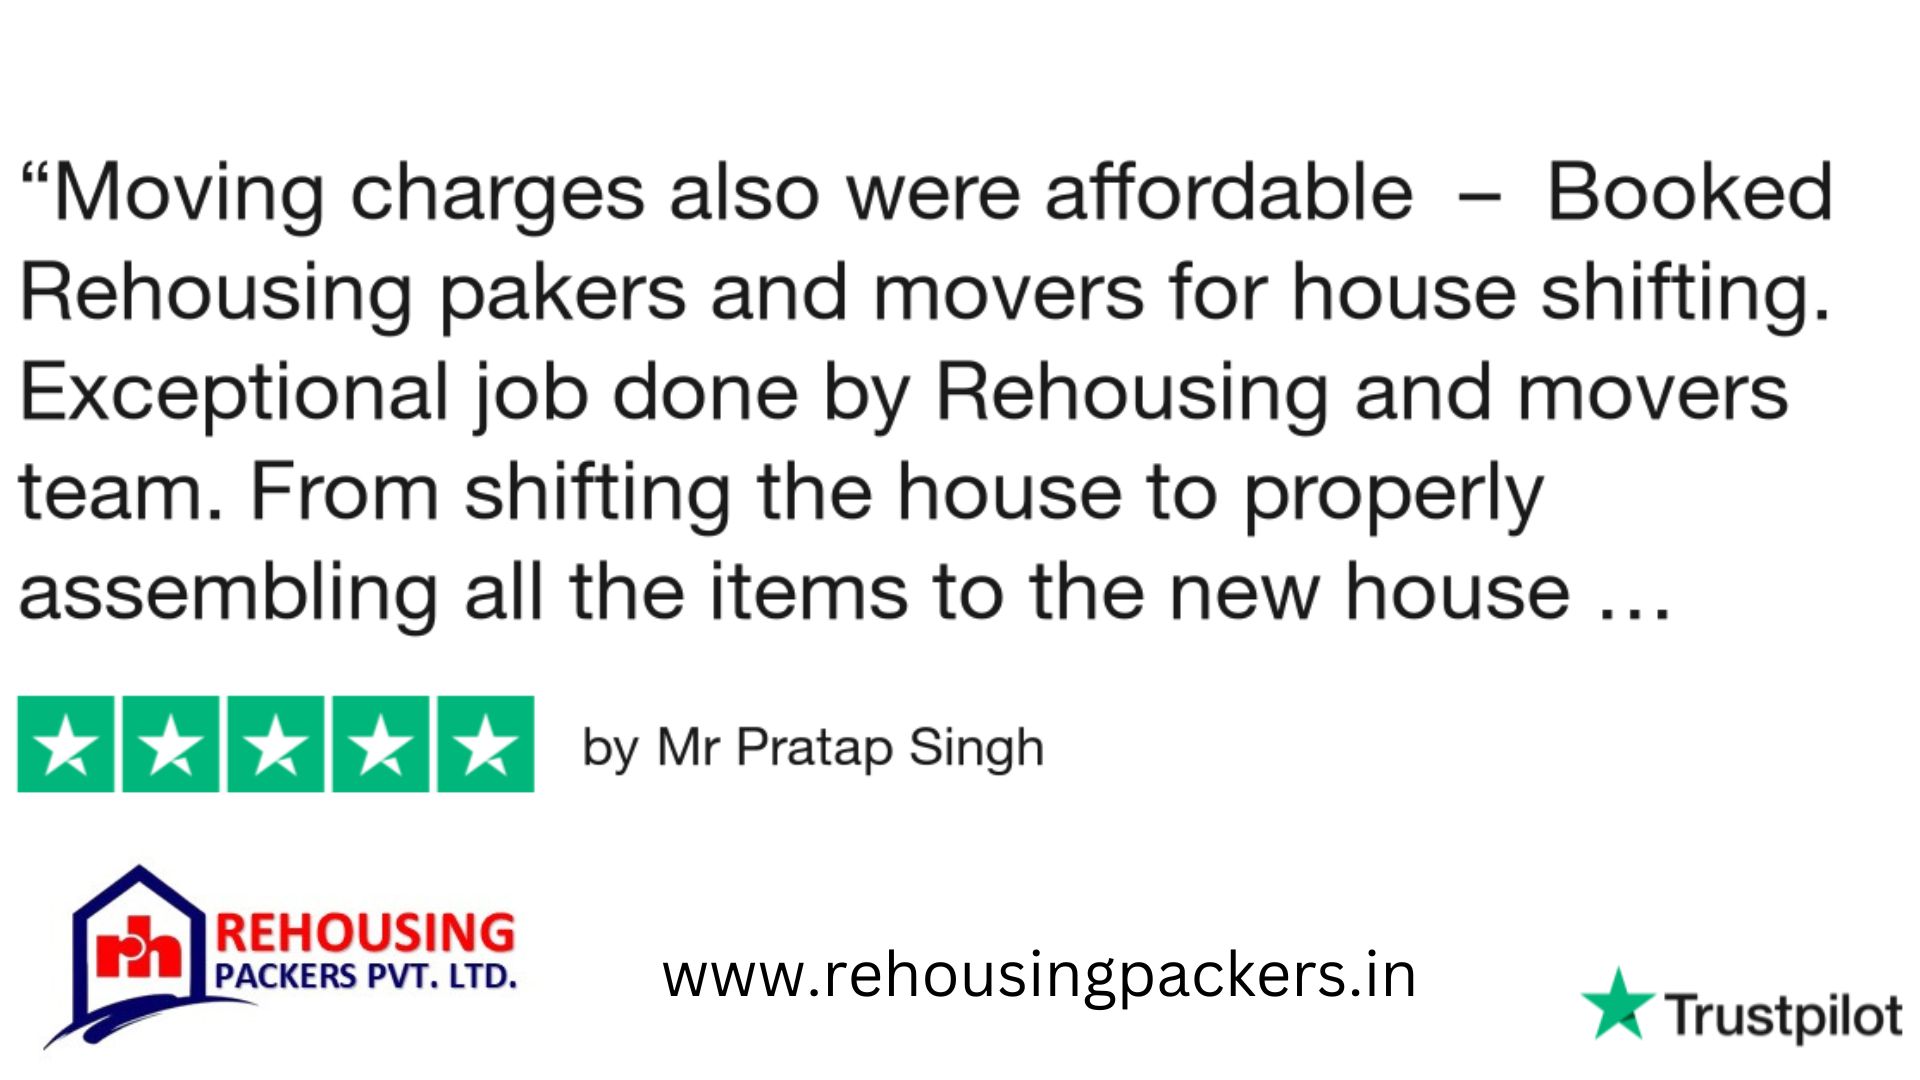 Rehousing packers and movers reviews trustpilot 3